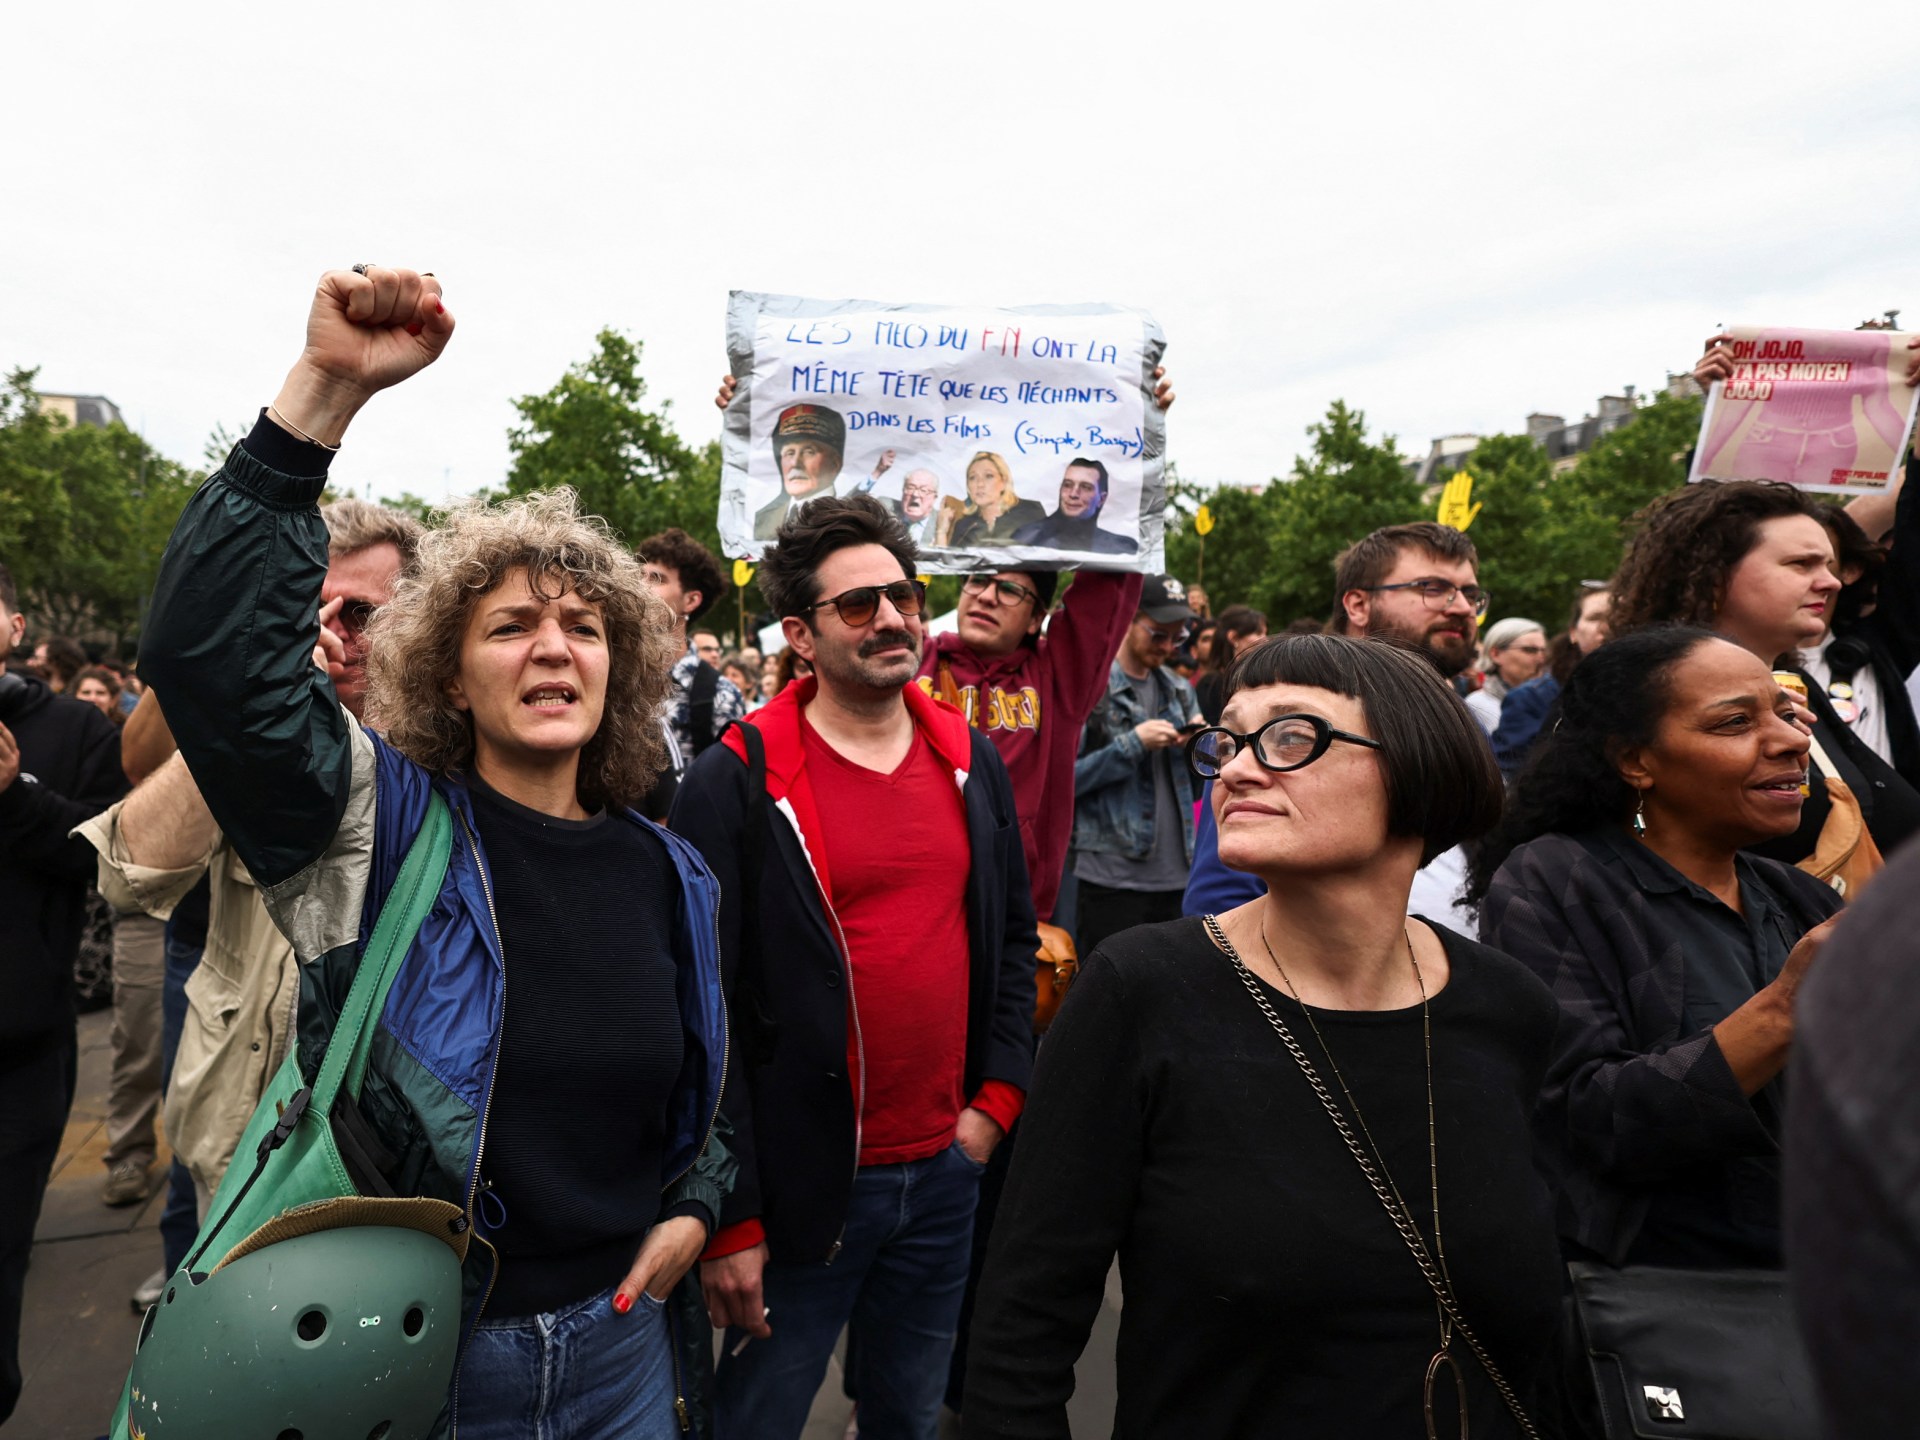 2024-07-03T163421Z_810271916_RC2SN8AEOP83_RTRMADP_3_FRANCE-ELECTION-PROTEST-1720191067.jpg